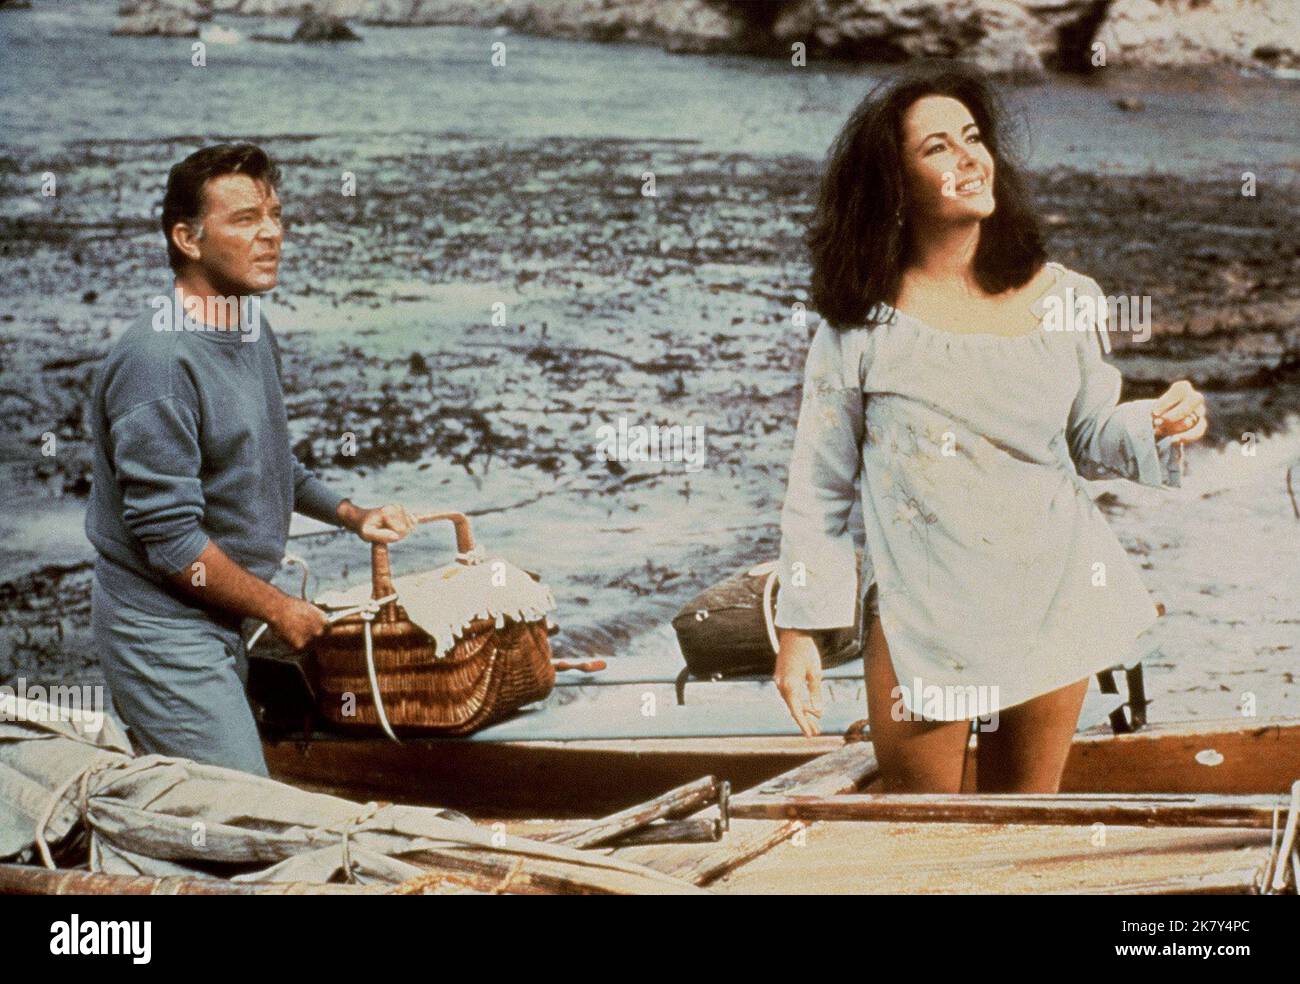 Richard Burton & Elizabeth Taylor Film: The Sandpiper (USA 1965)  Characters: Dr. Edward Hewitt & Laura Reynolds Director: Vincente Minnelli  23 June 1965 **WARNING** This Photograph is for editorial use only and